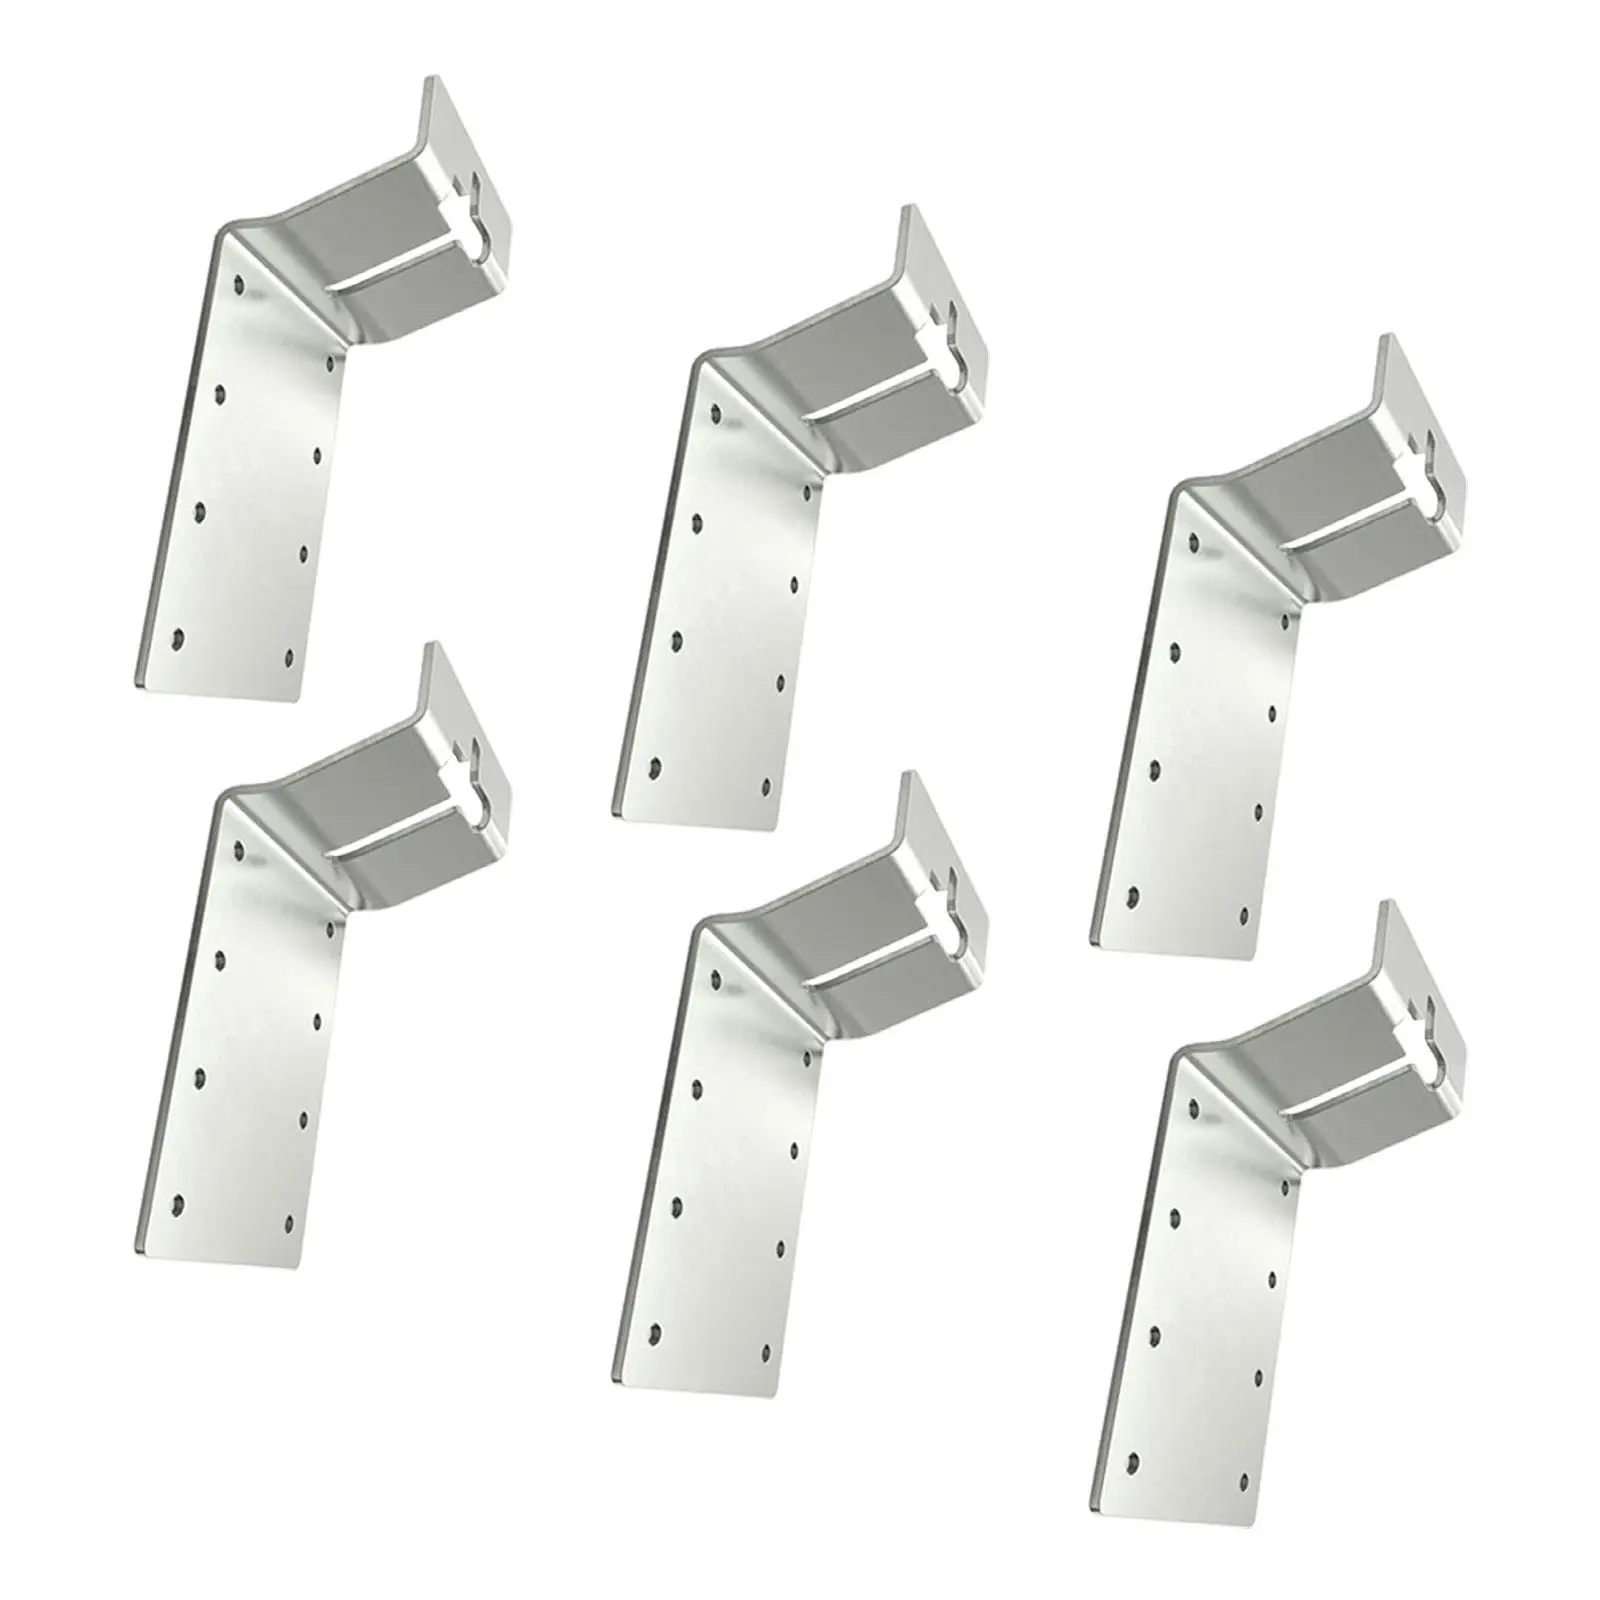 

6 Pieces T Post Brackets Electroplating Process Sturdy Corner Brace for Mailbox Outdoor Signs Fences Installation Bird Boxes